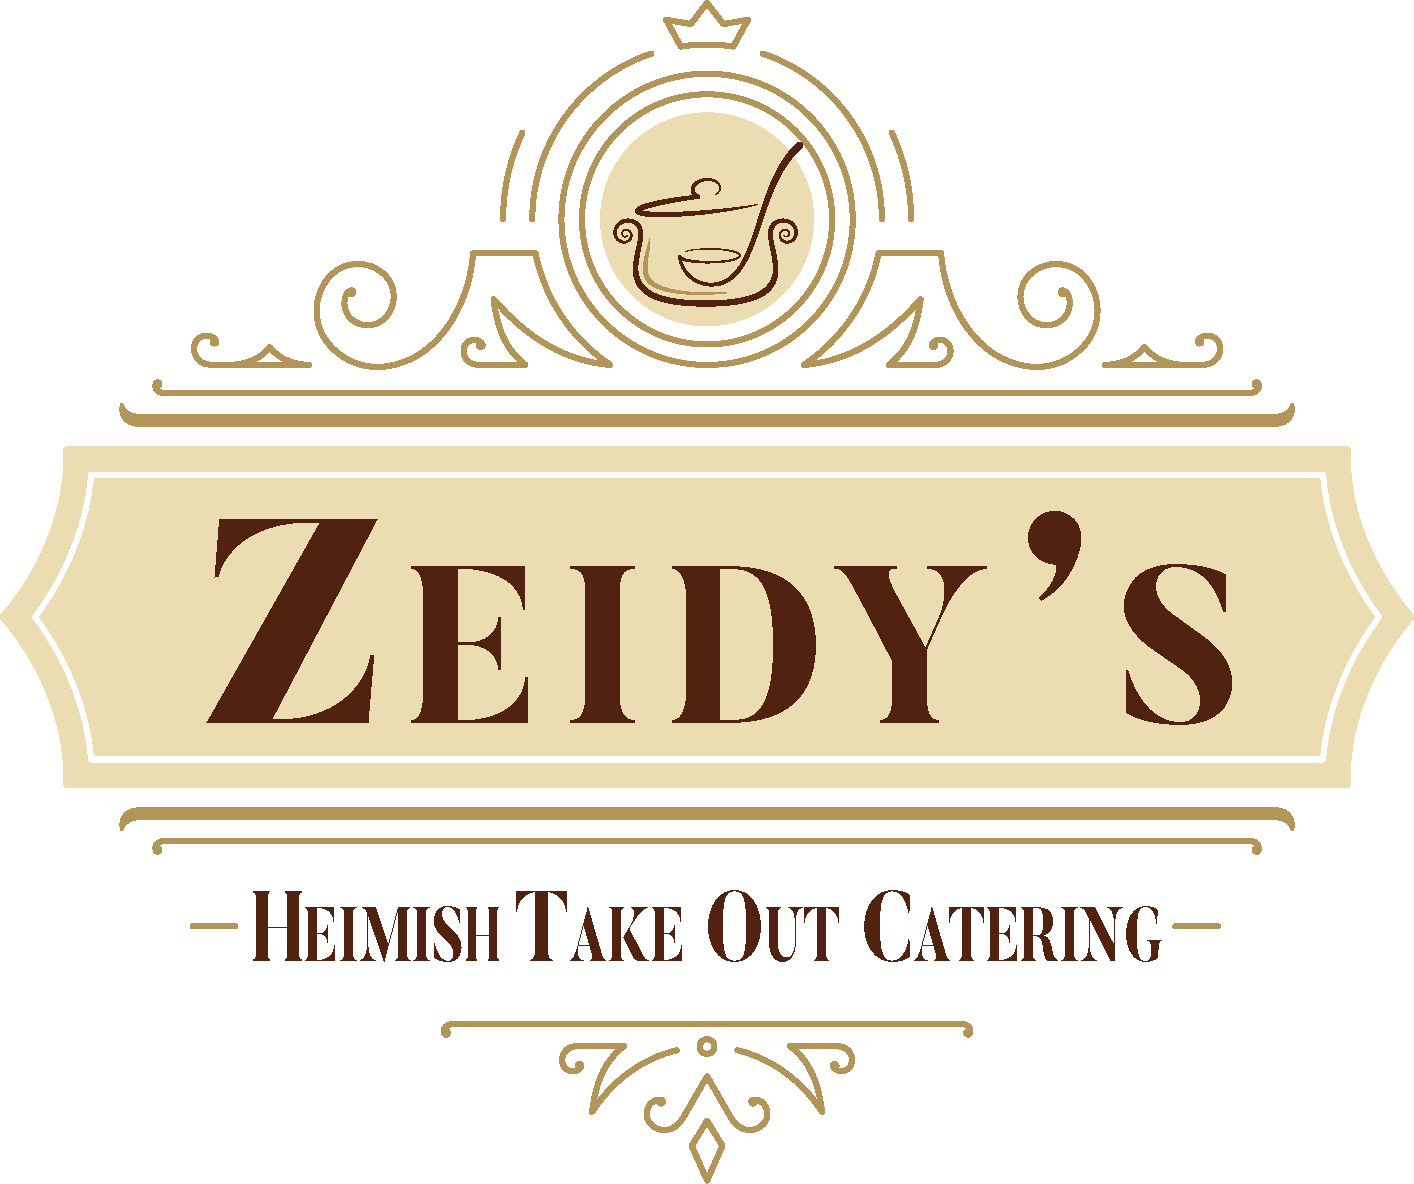 Zeidy's Heimish Takeout Catering